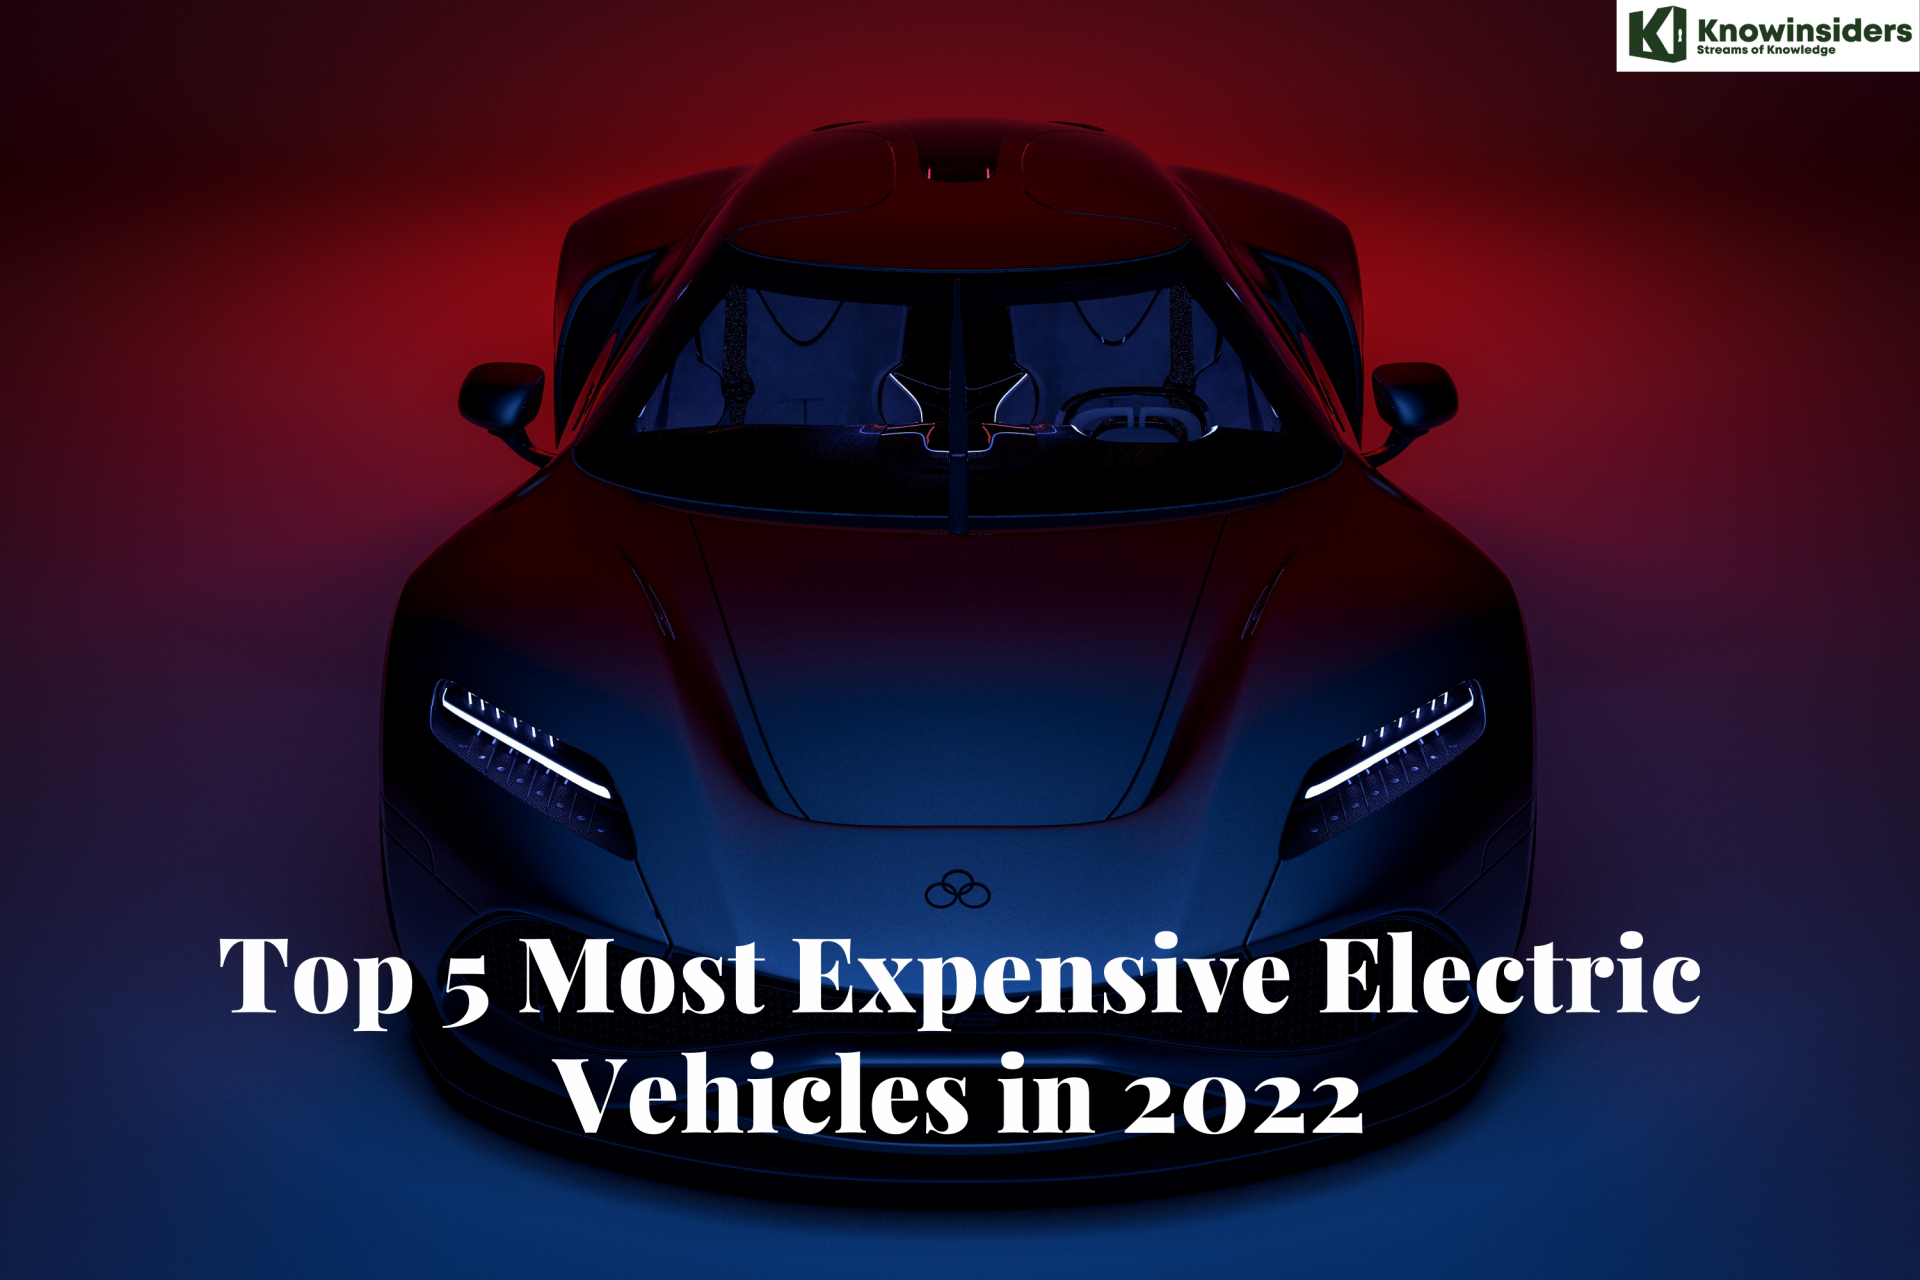 Top 5 Most Expensive Electric Vehicles in the World Today